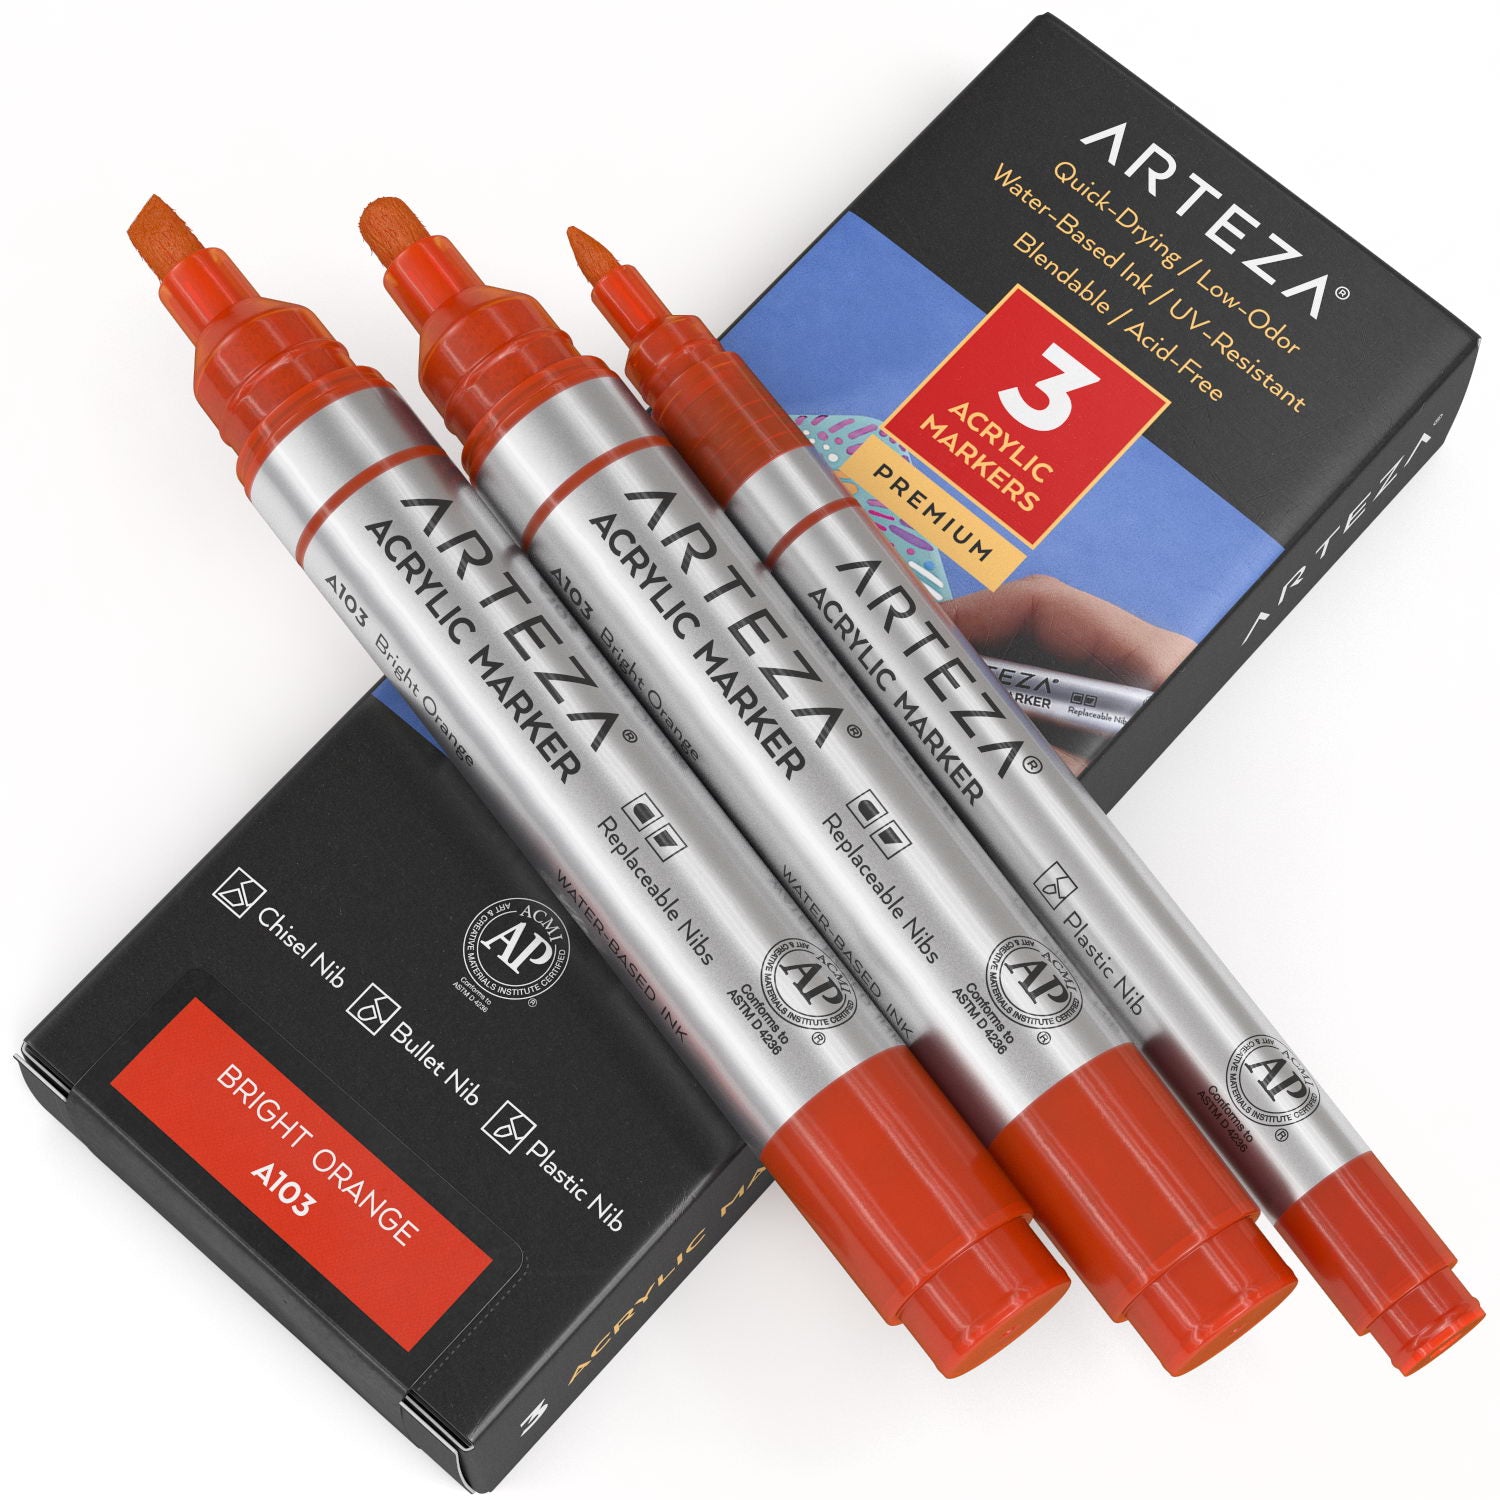 ARTEZA Acrylic markers and Paint Bundle, Painting Art Supplies for Artist,  Hobby Painters & Beginners